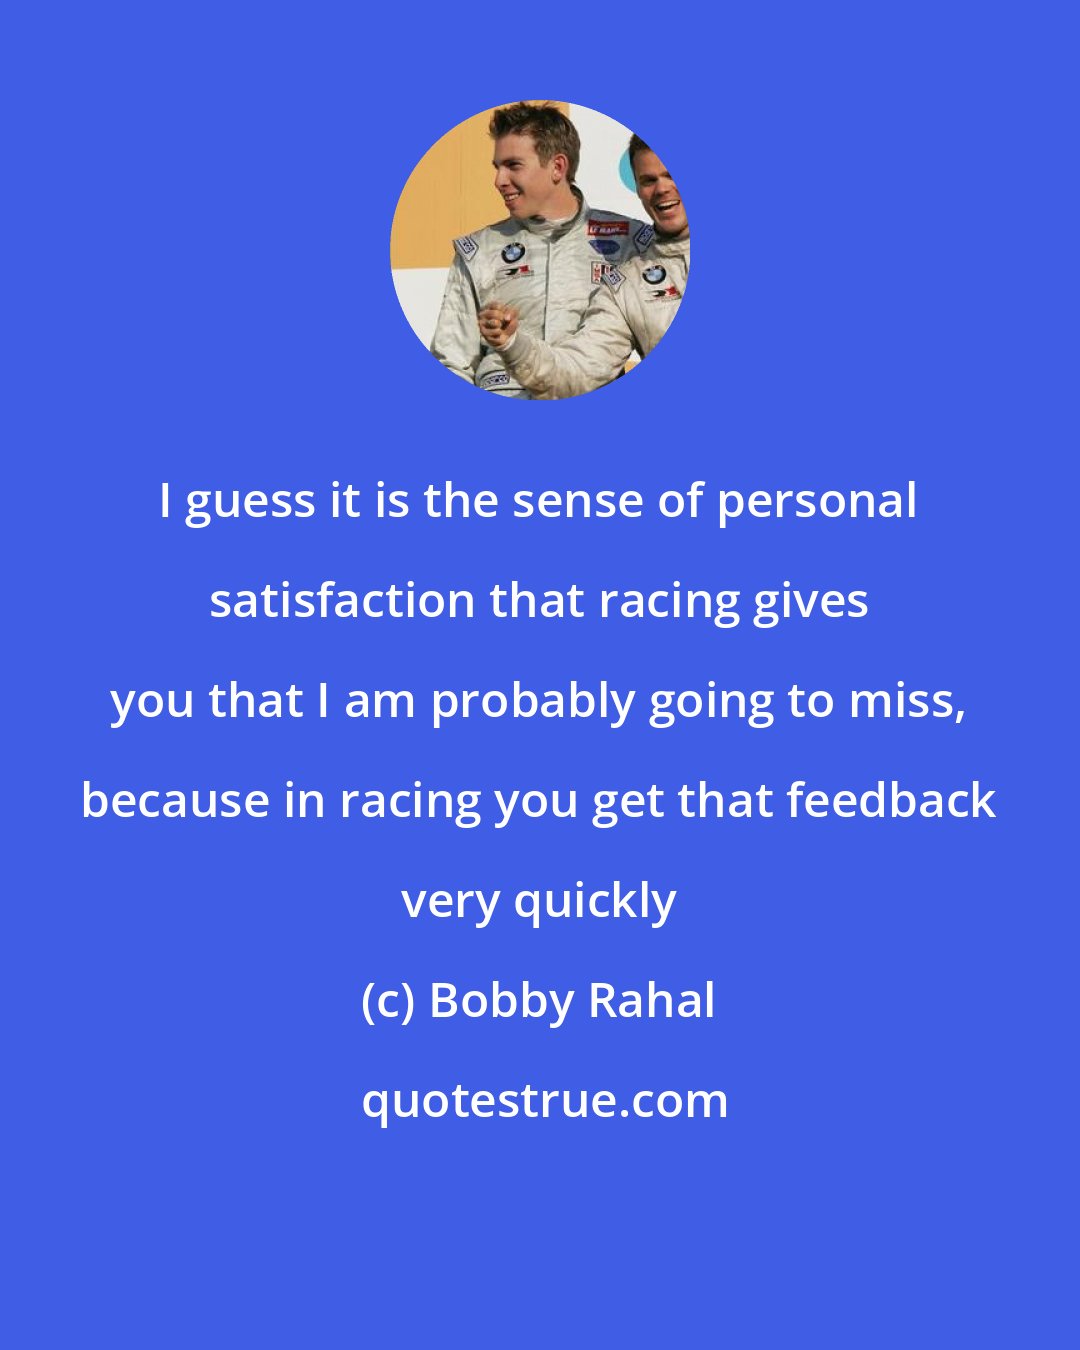 Bobby Rahal: I guess it is the sense of personal satisfaction that racing gives you that I am probably going to miss, because in racing you get that feedback very quickly